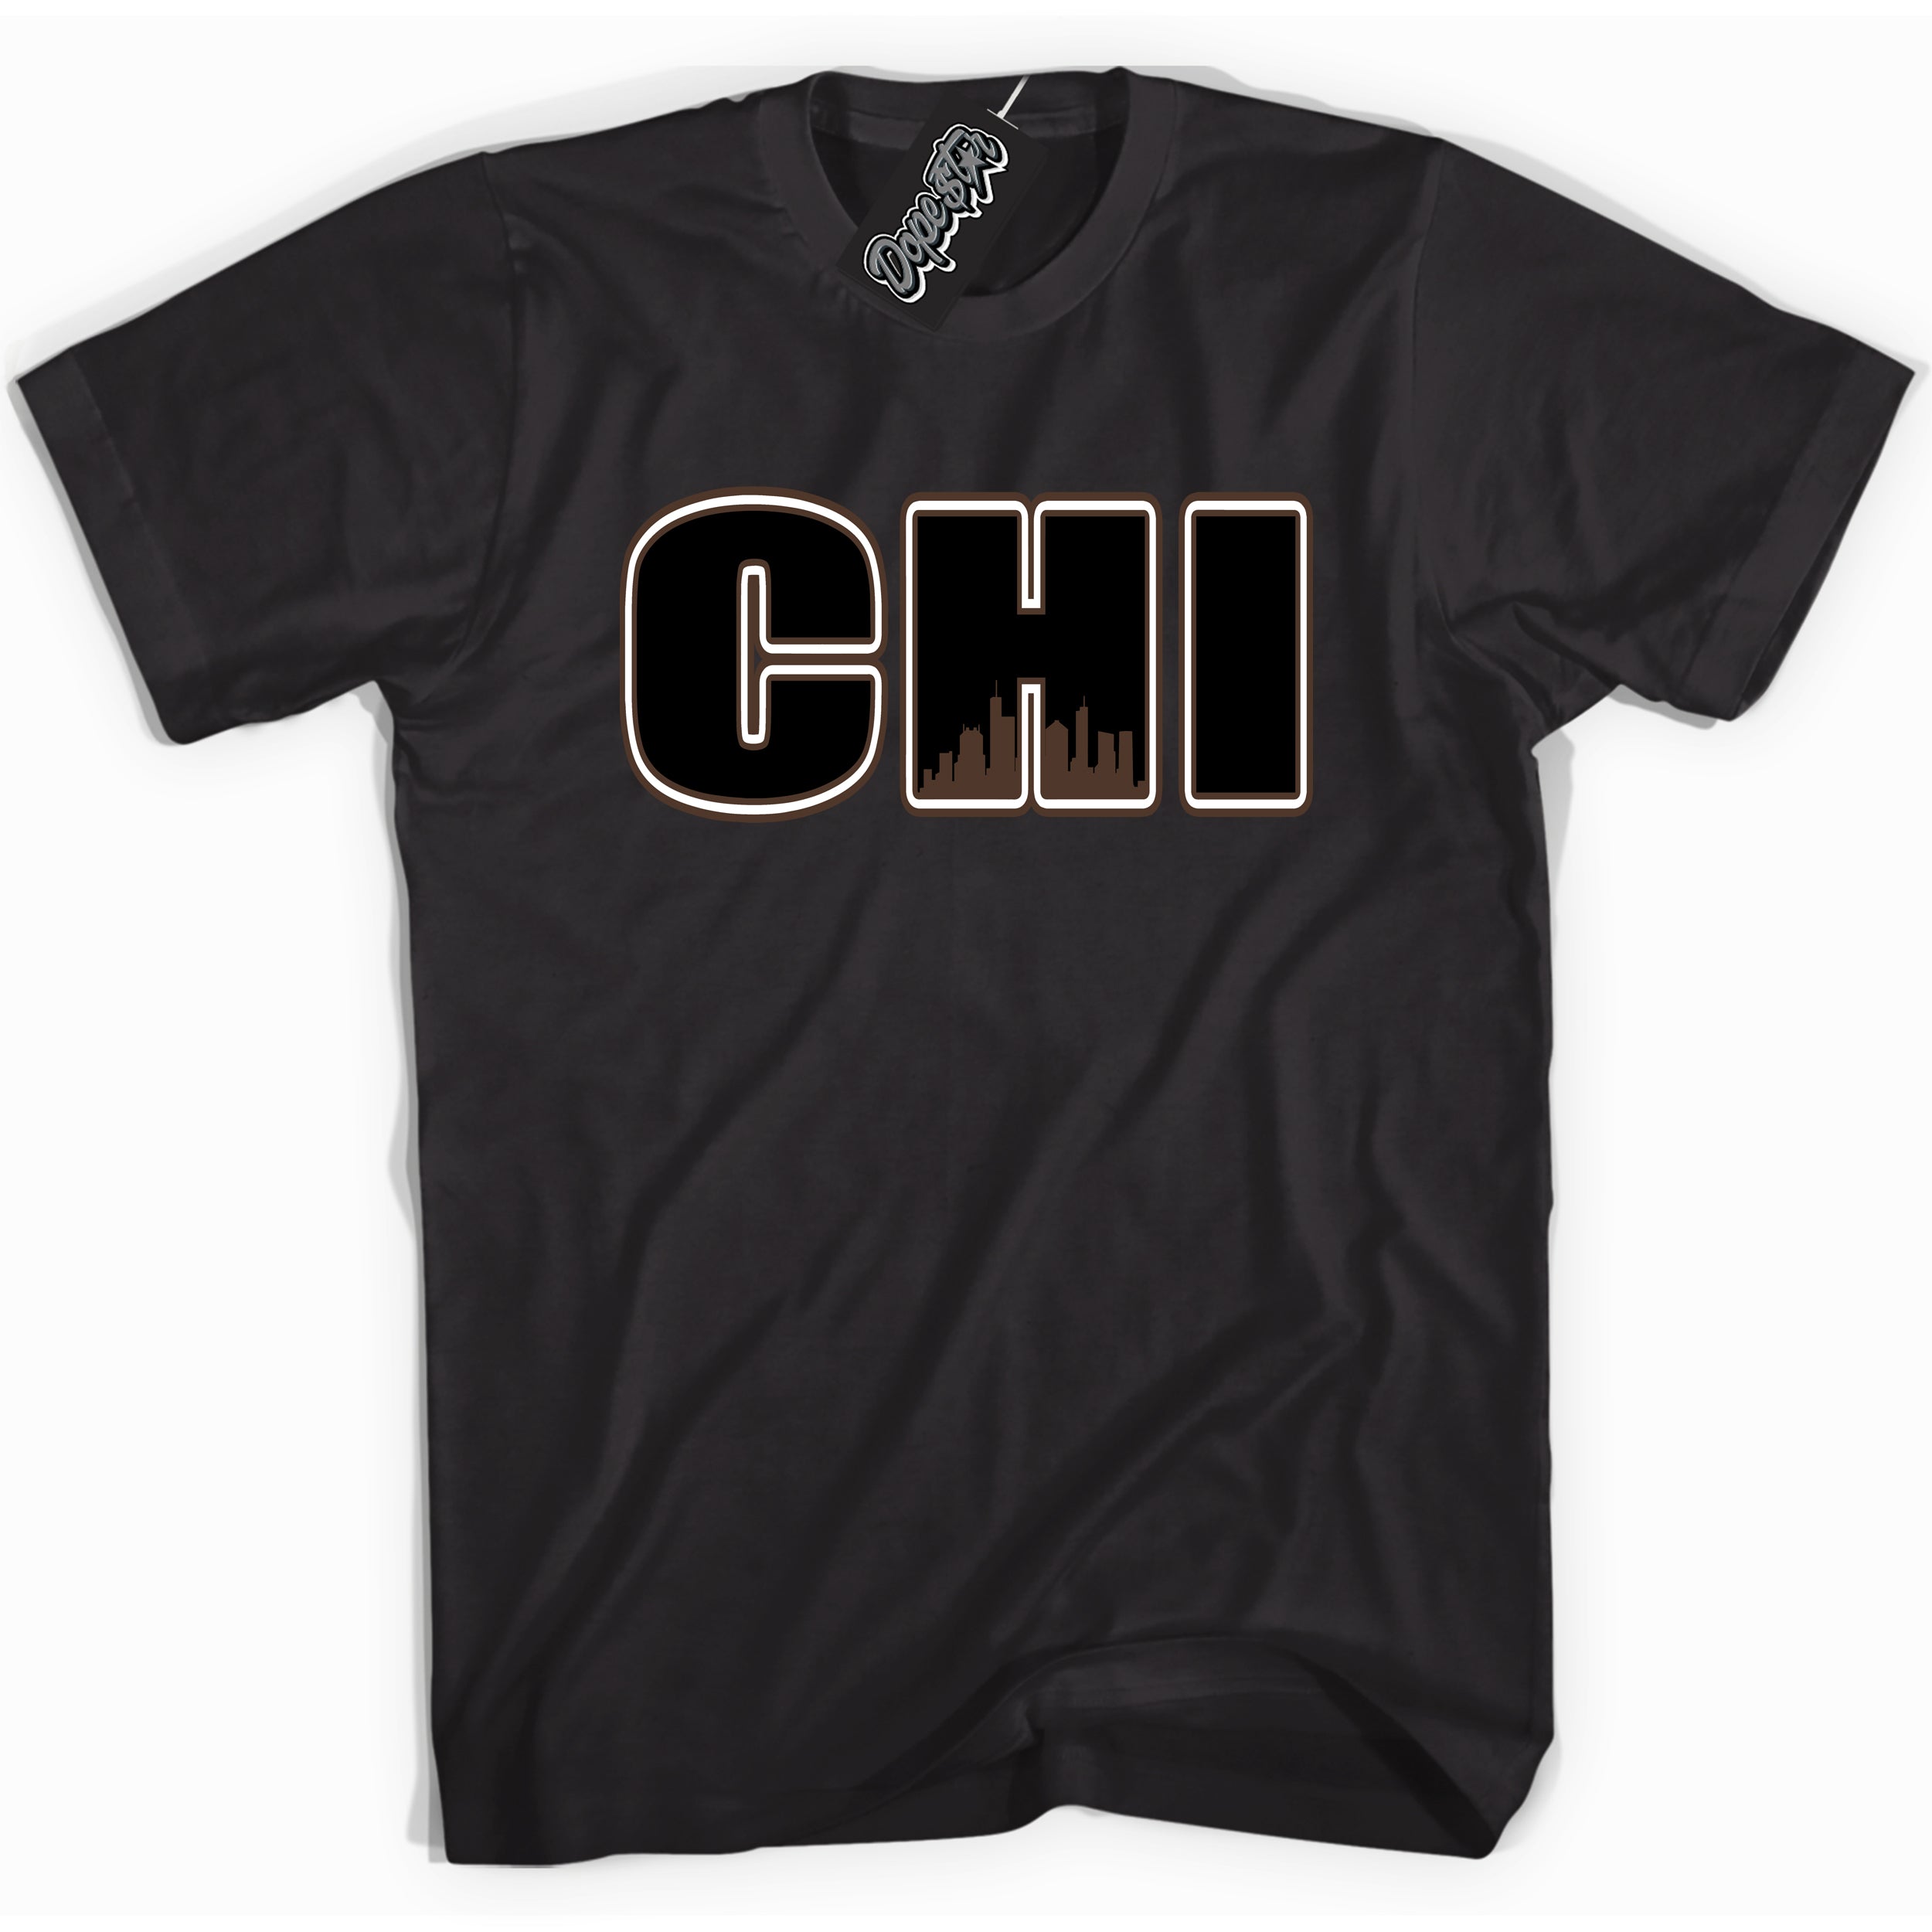 Cool Black graphic tee with “ Chicago ” design, that perfectly matches Palomino 1s sneakers 